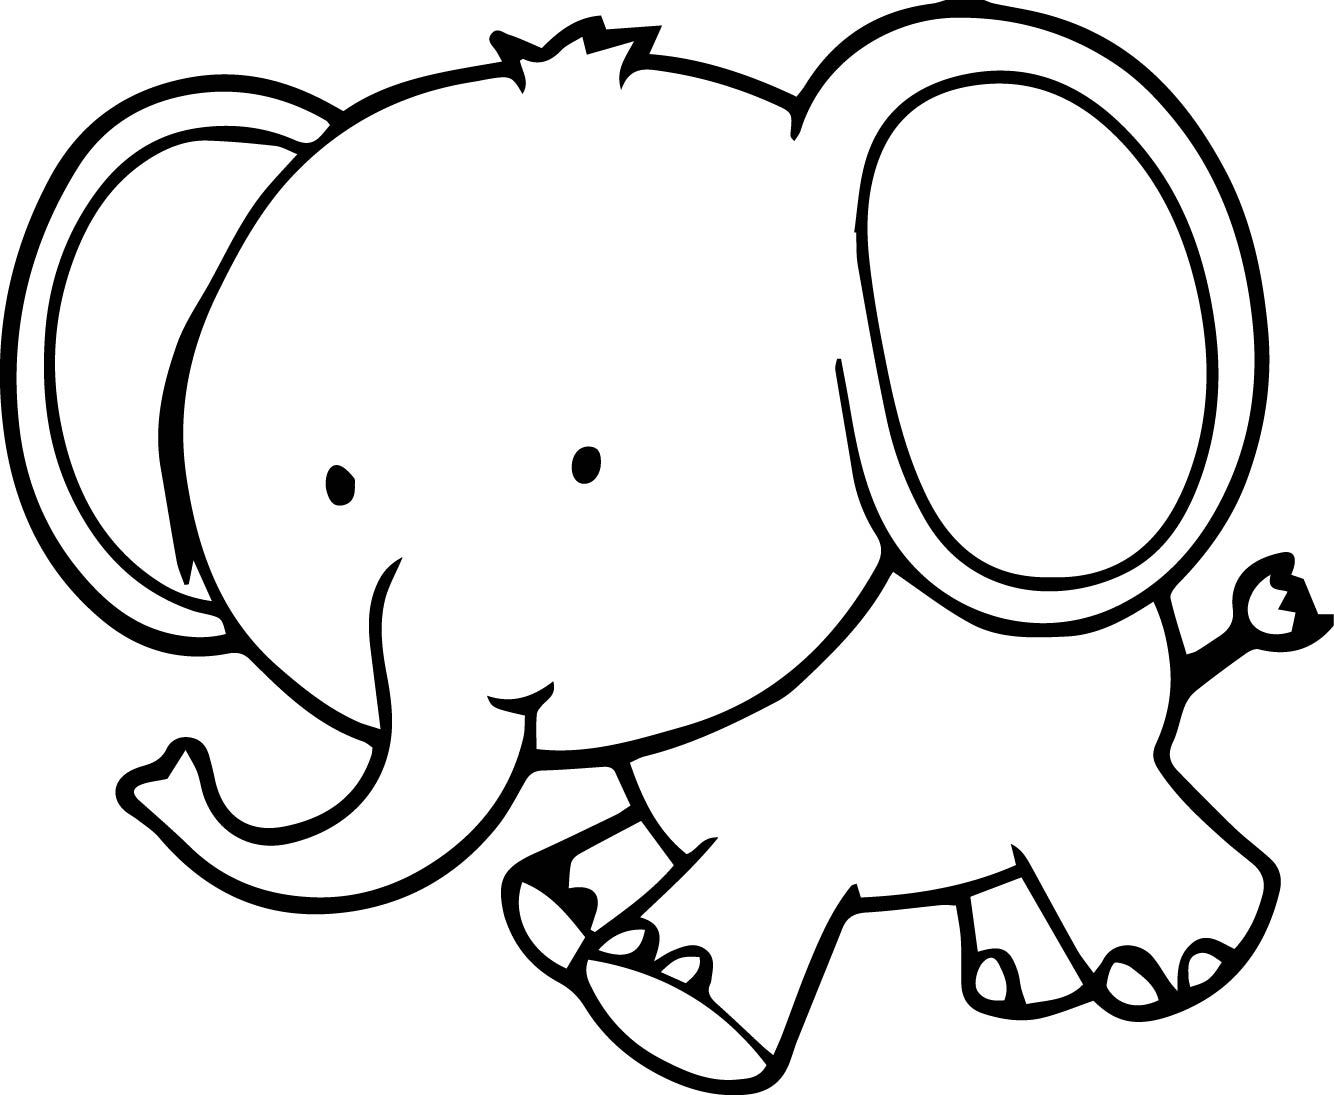 Cute Elephant Coloring Pages at GetColorings.com   Free printable ...